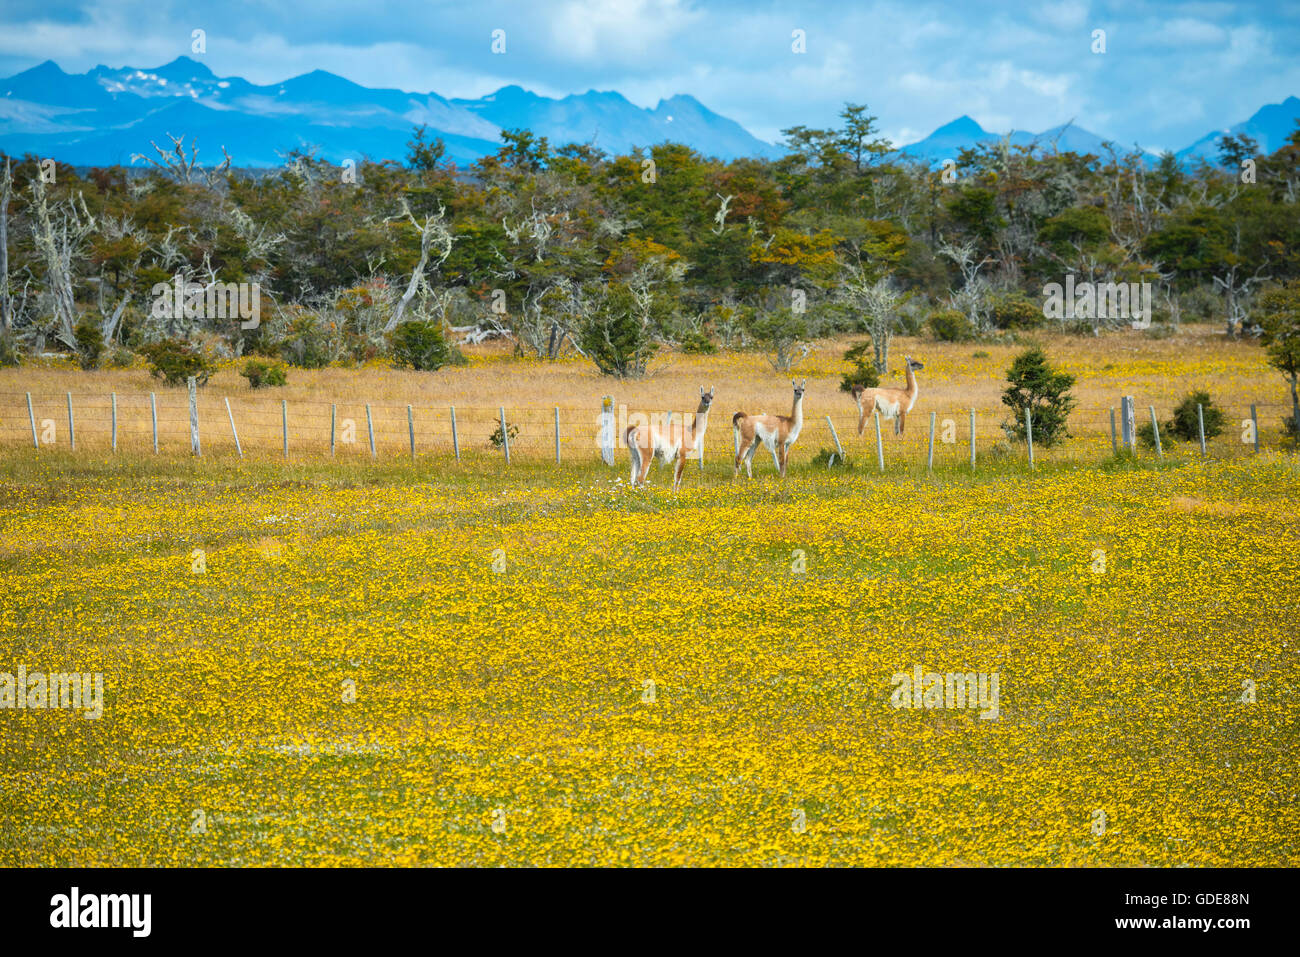 South America,Chile,Tierra del Fuego,Guanacos in flower filed Stock Photo